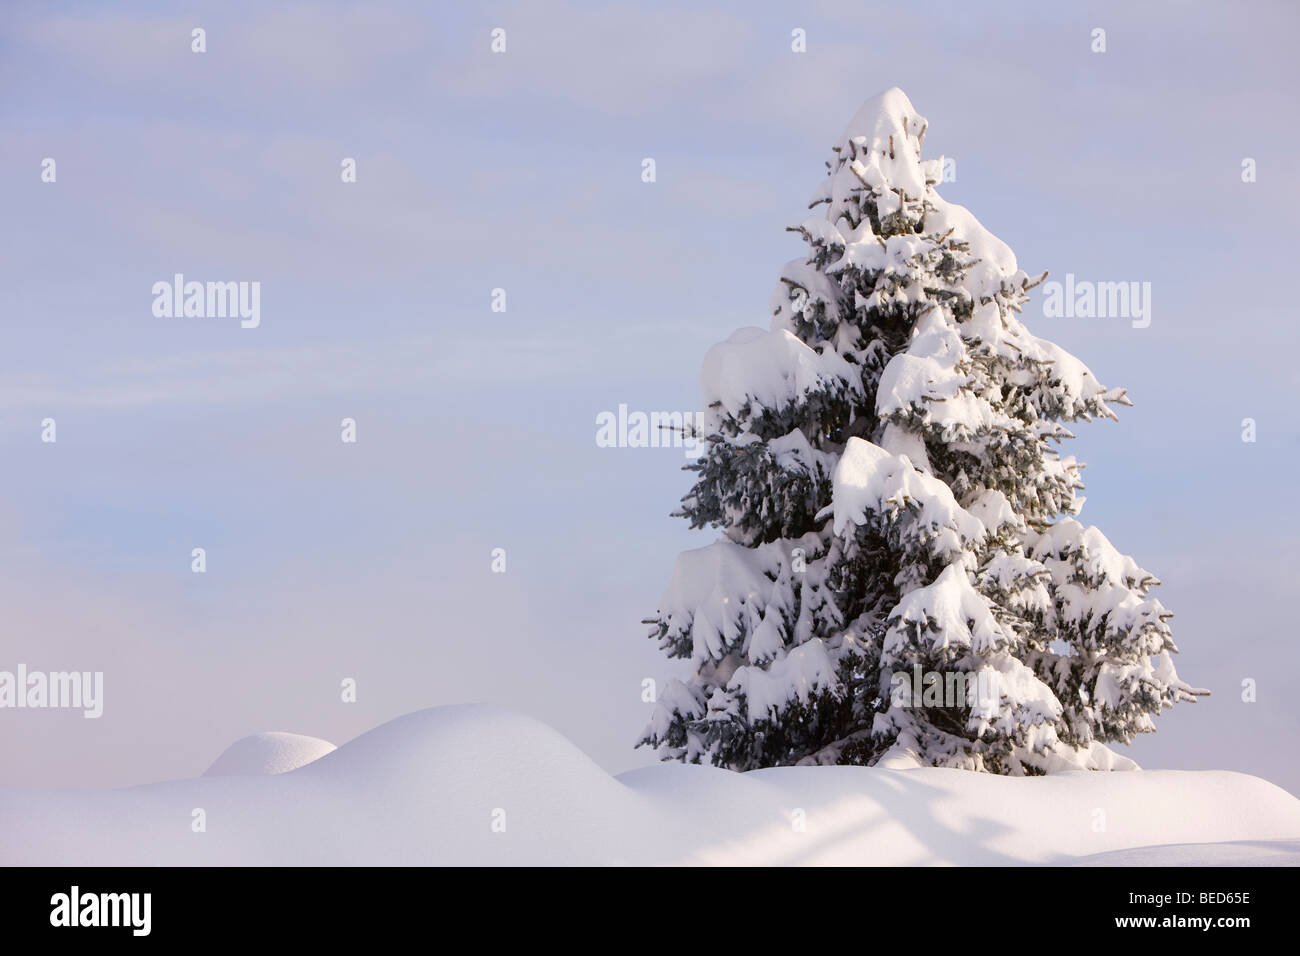 Snow-covered coniferous tree after substantial snowfall, Gailtal valley, Kaernten, Austria, Europe Stock Photo